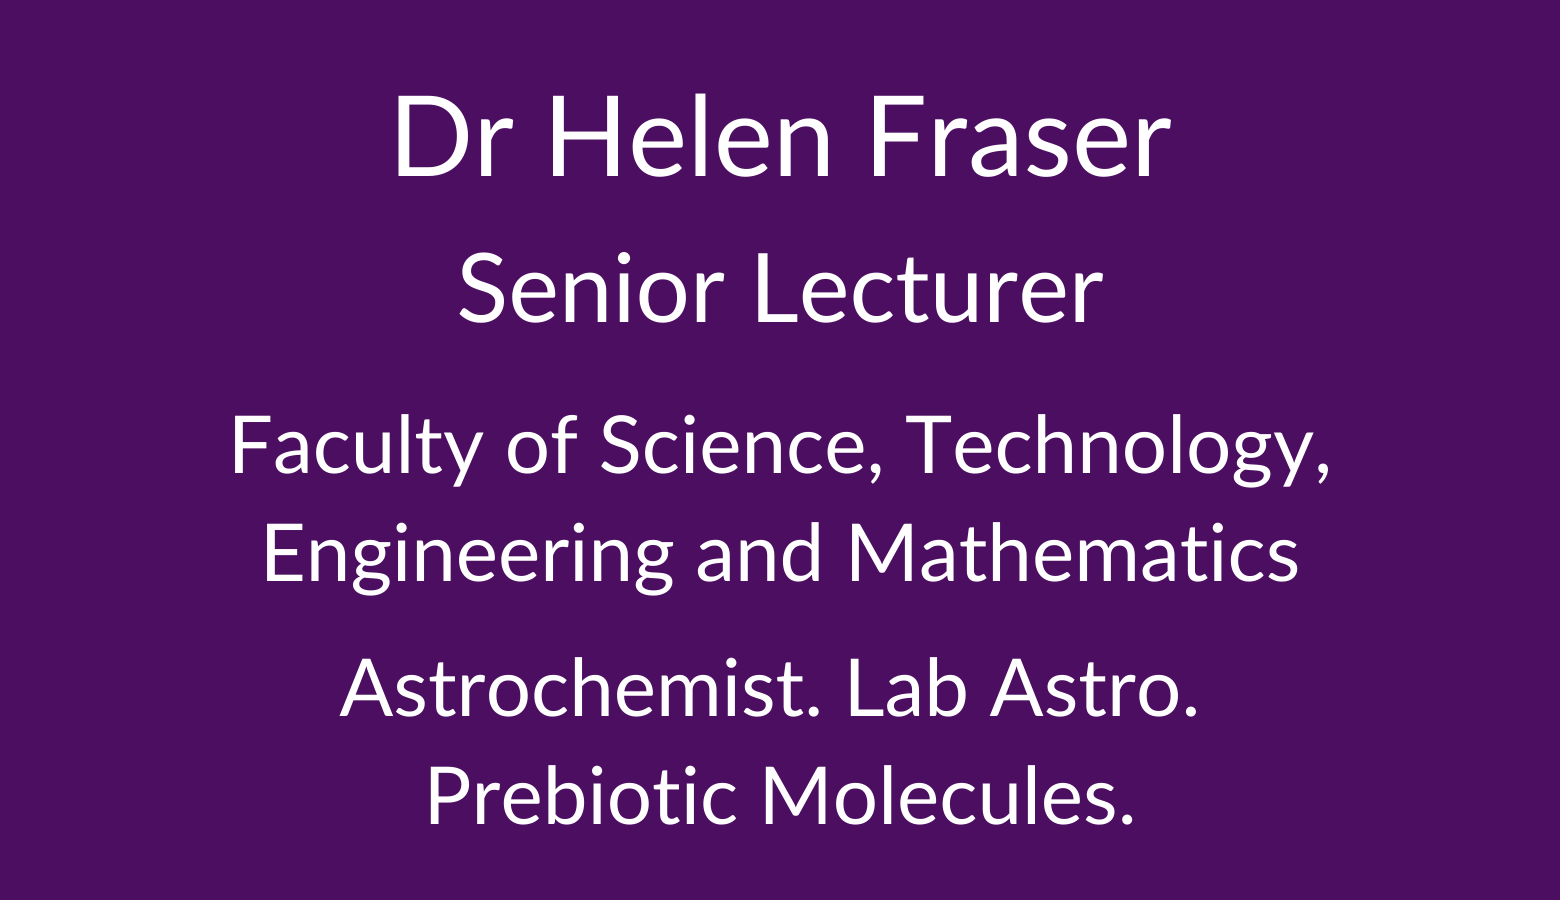 Dr Helen Fraser. Senior Lecturer. Faculty of Science. Technology, Engineering and Mathematics. Astrochemist. Lab Astro. Prebiotic Molecules.